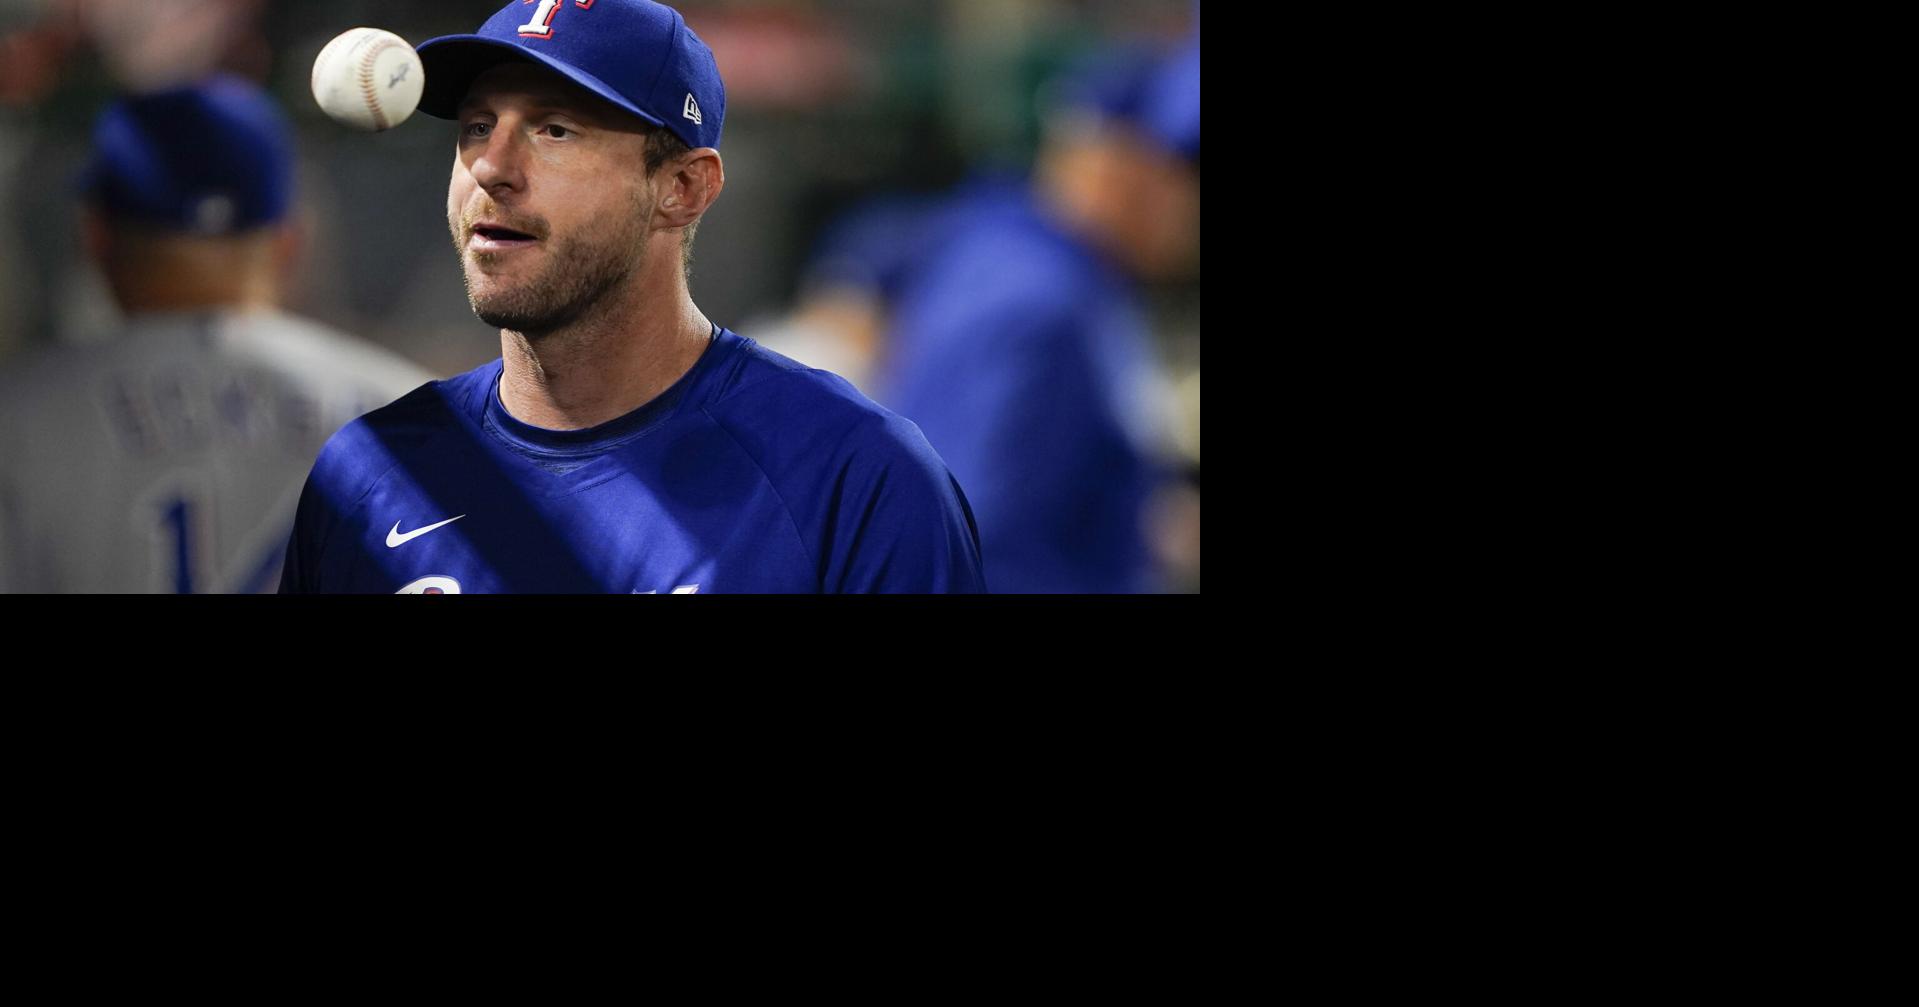 A nice article on Max Scherzer, and his brother who committed